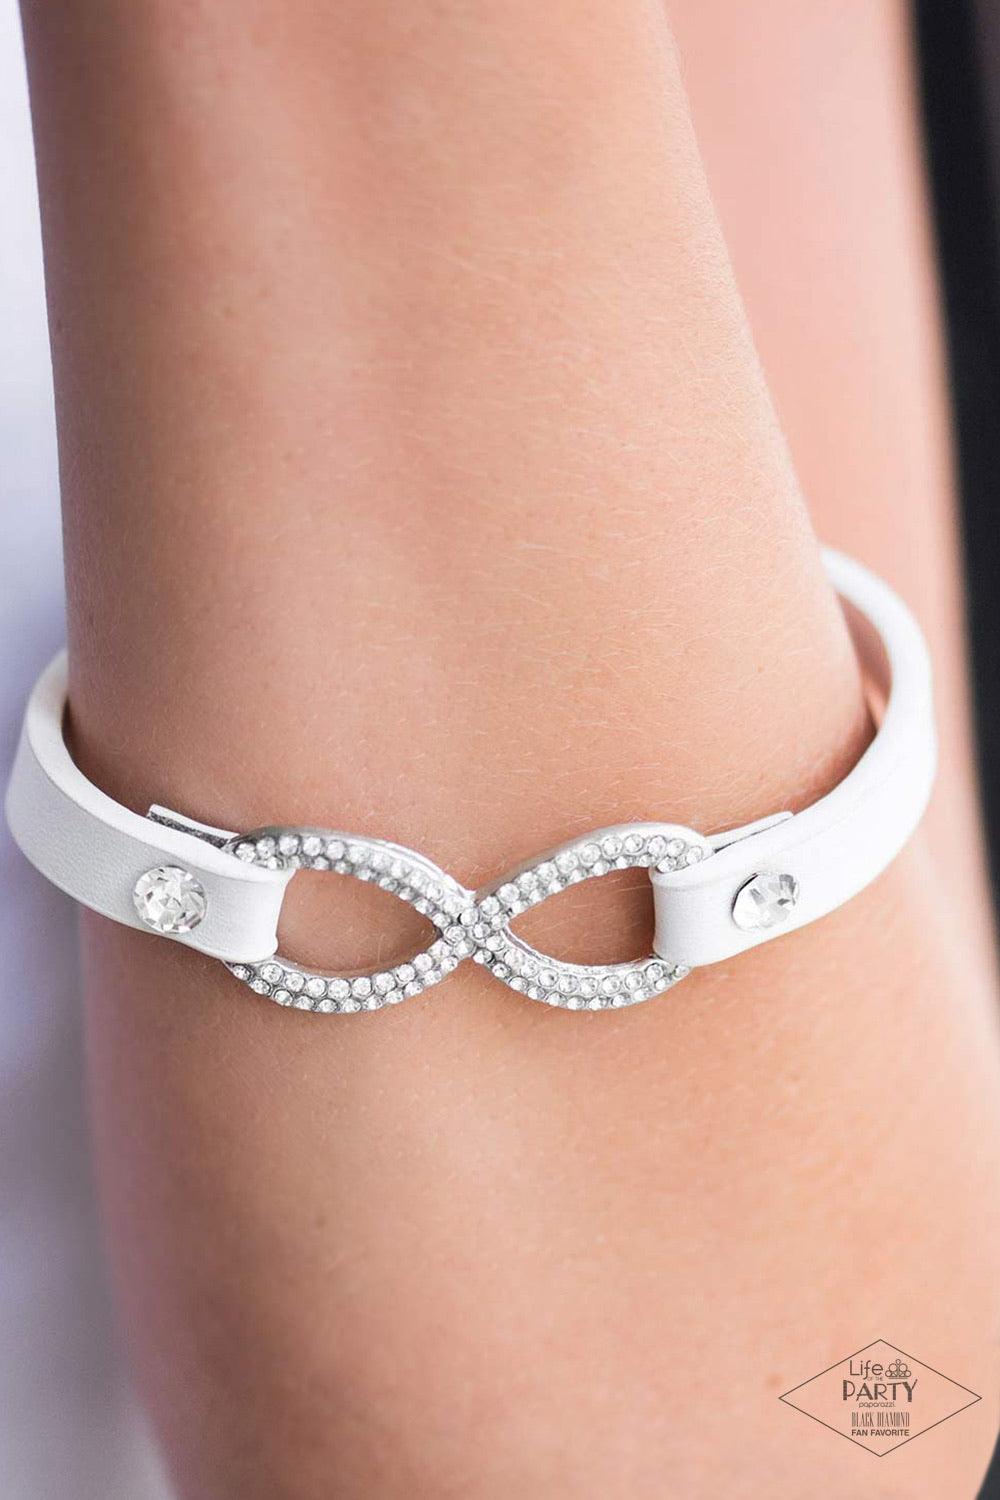 Paparazzi Accessories Innocent Till Proven GLITZY - White A skinny strip of white leather attaches to a silver infinity symbol encrusted in glittery rhinestones. Flanked by two dazzling solitaire rhinestones, the glitzy design creates an incandescent cent